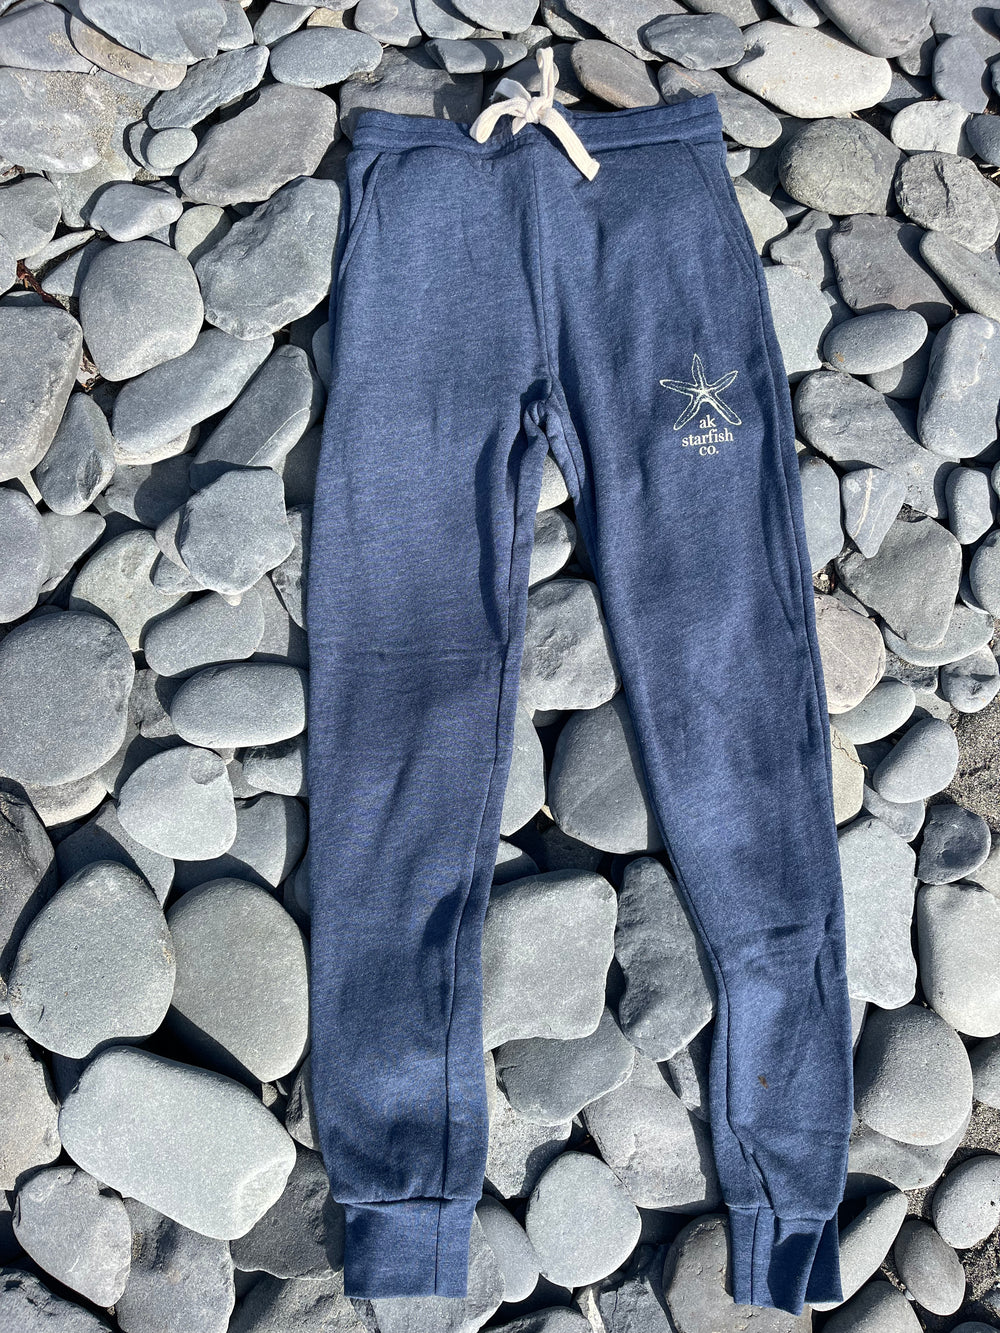 Midnight AK Starfish Co. French Terry Joggers. $68.00